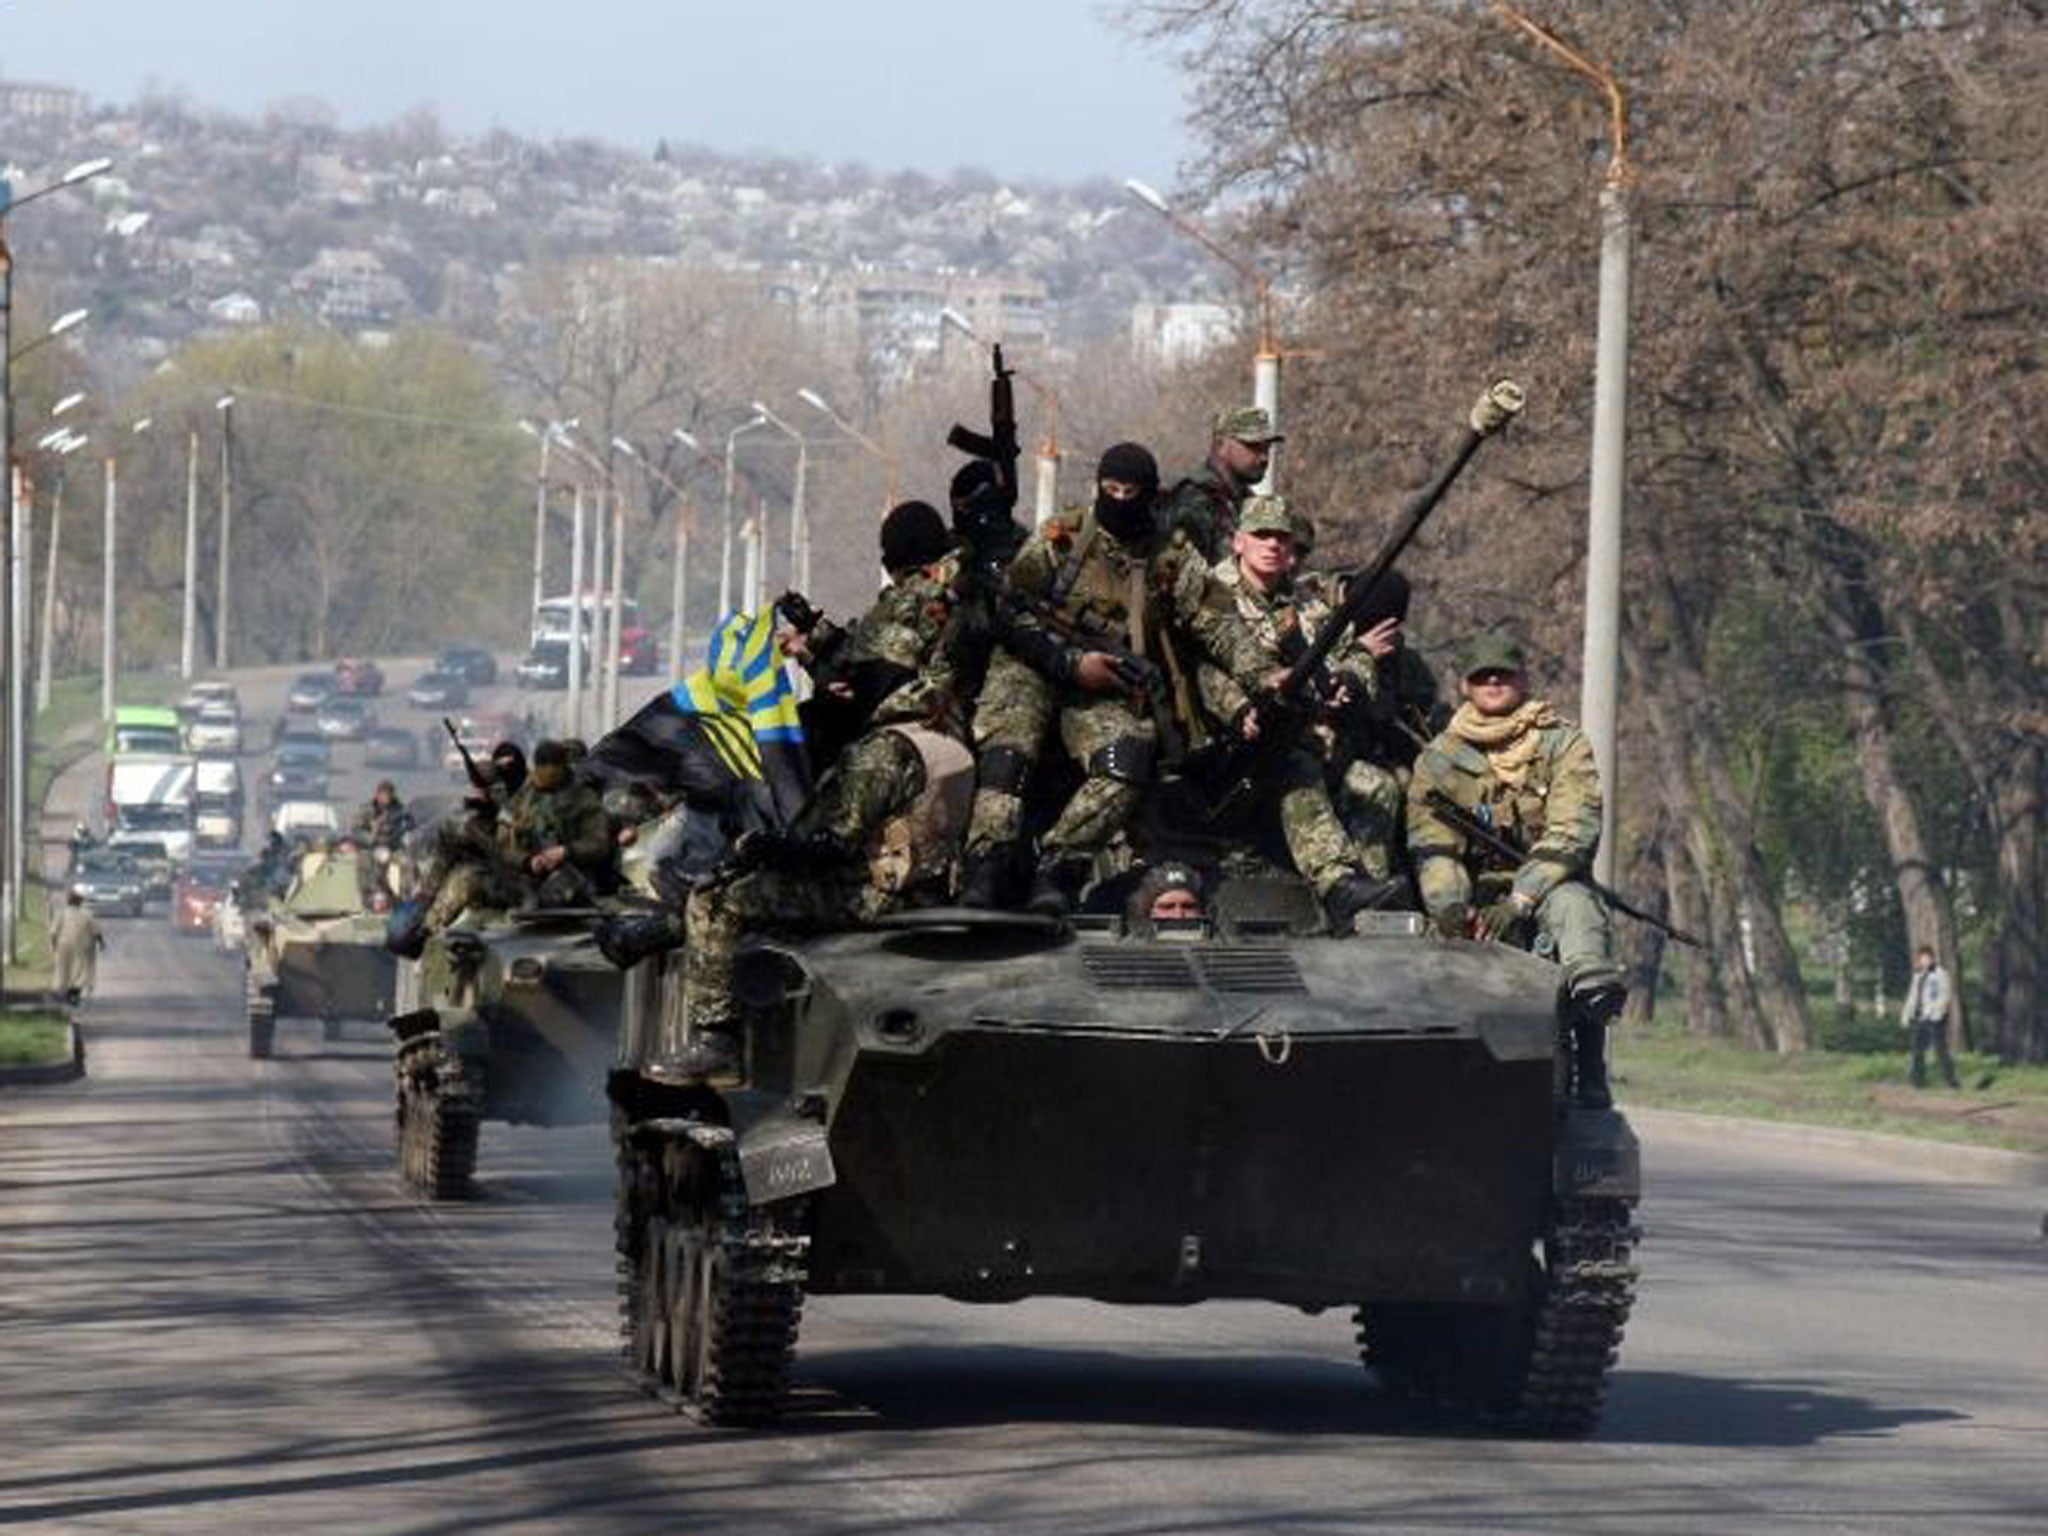 Armed people move on the few APC with Donetsk region flag in the eastern Ukrainian city of Kramatorsk on April 16, 2014.